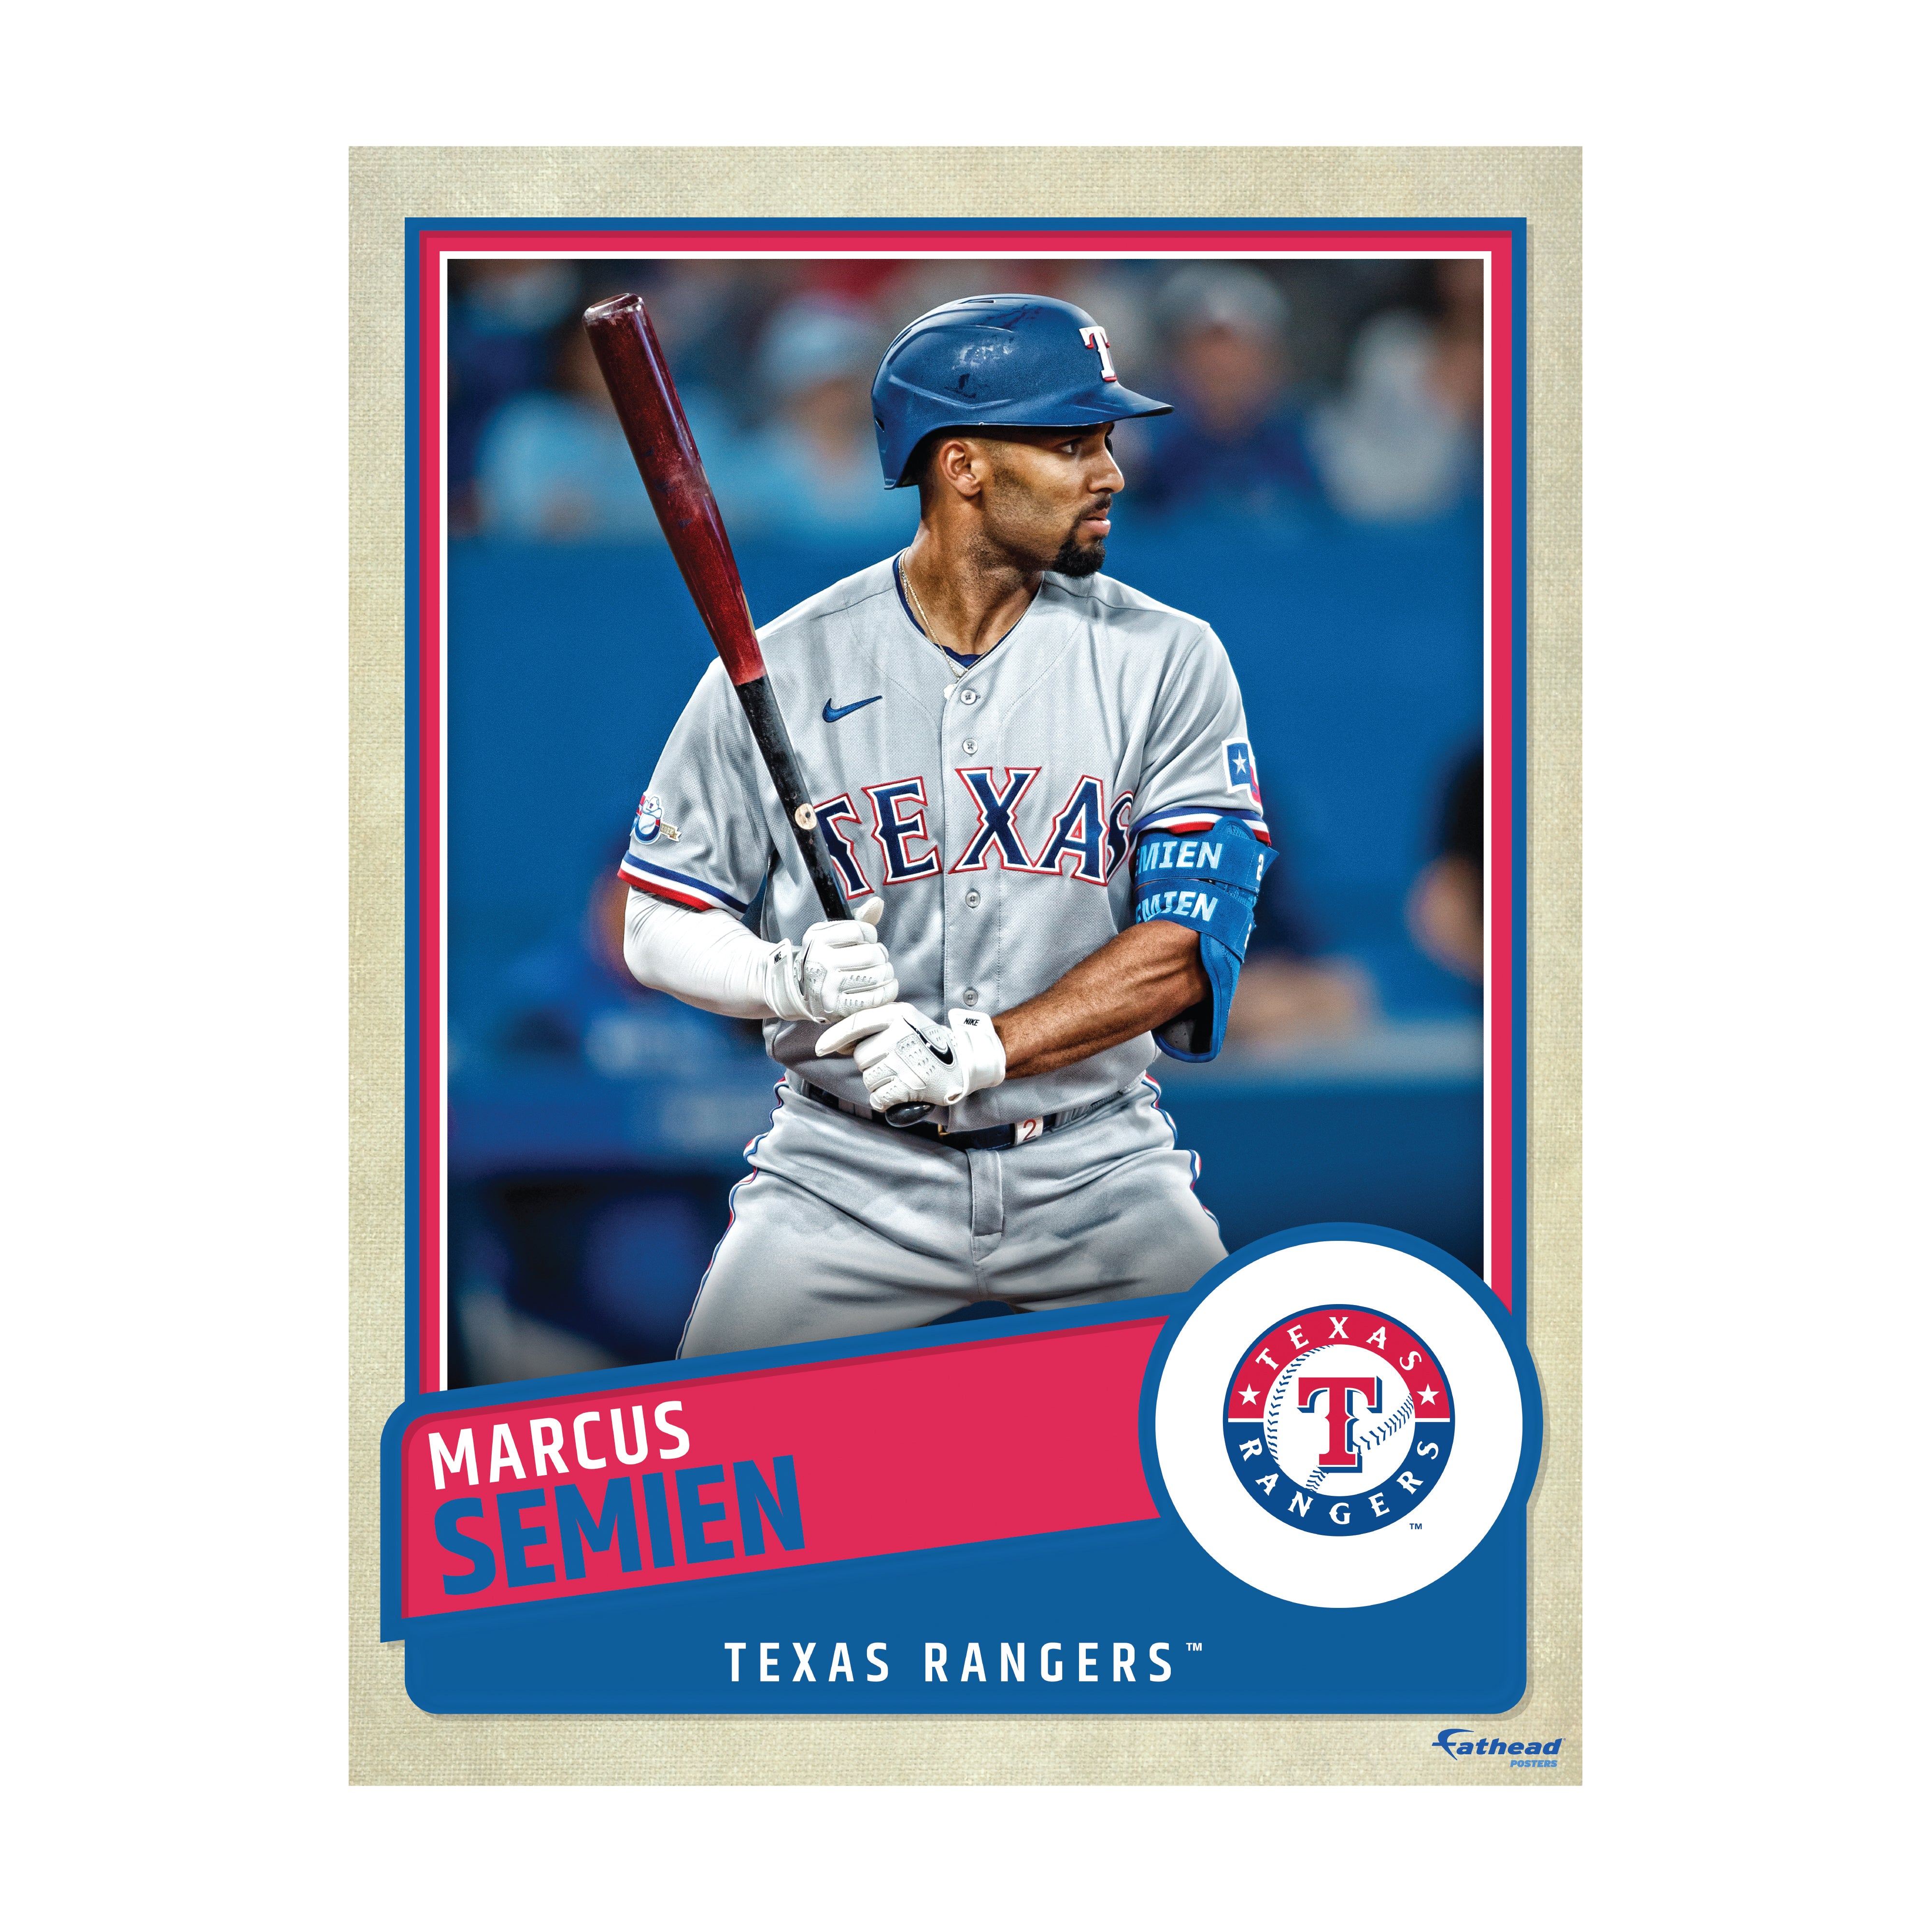 Texas Rangers: Marcus Semien 2022 Poster - Officially Licensed MLB